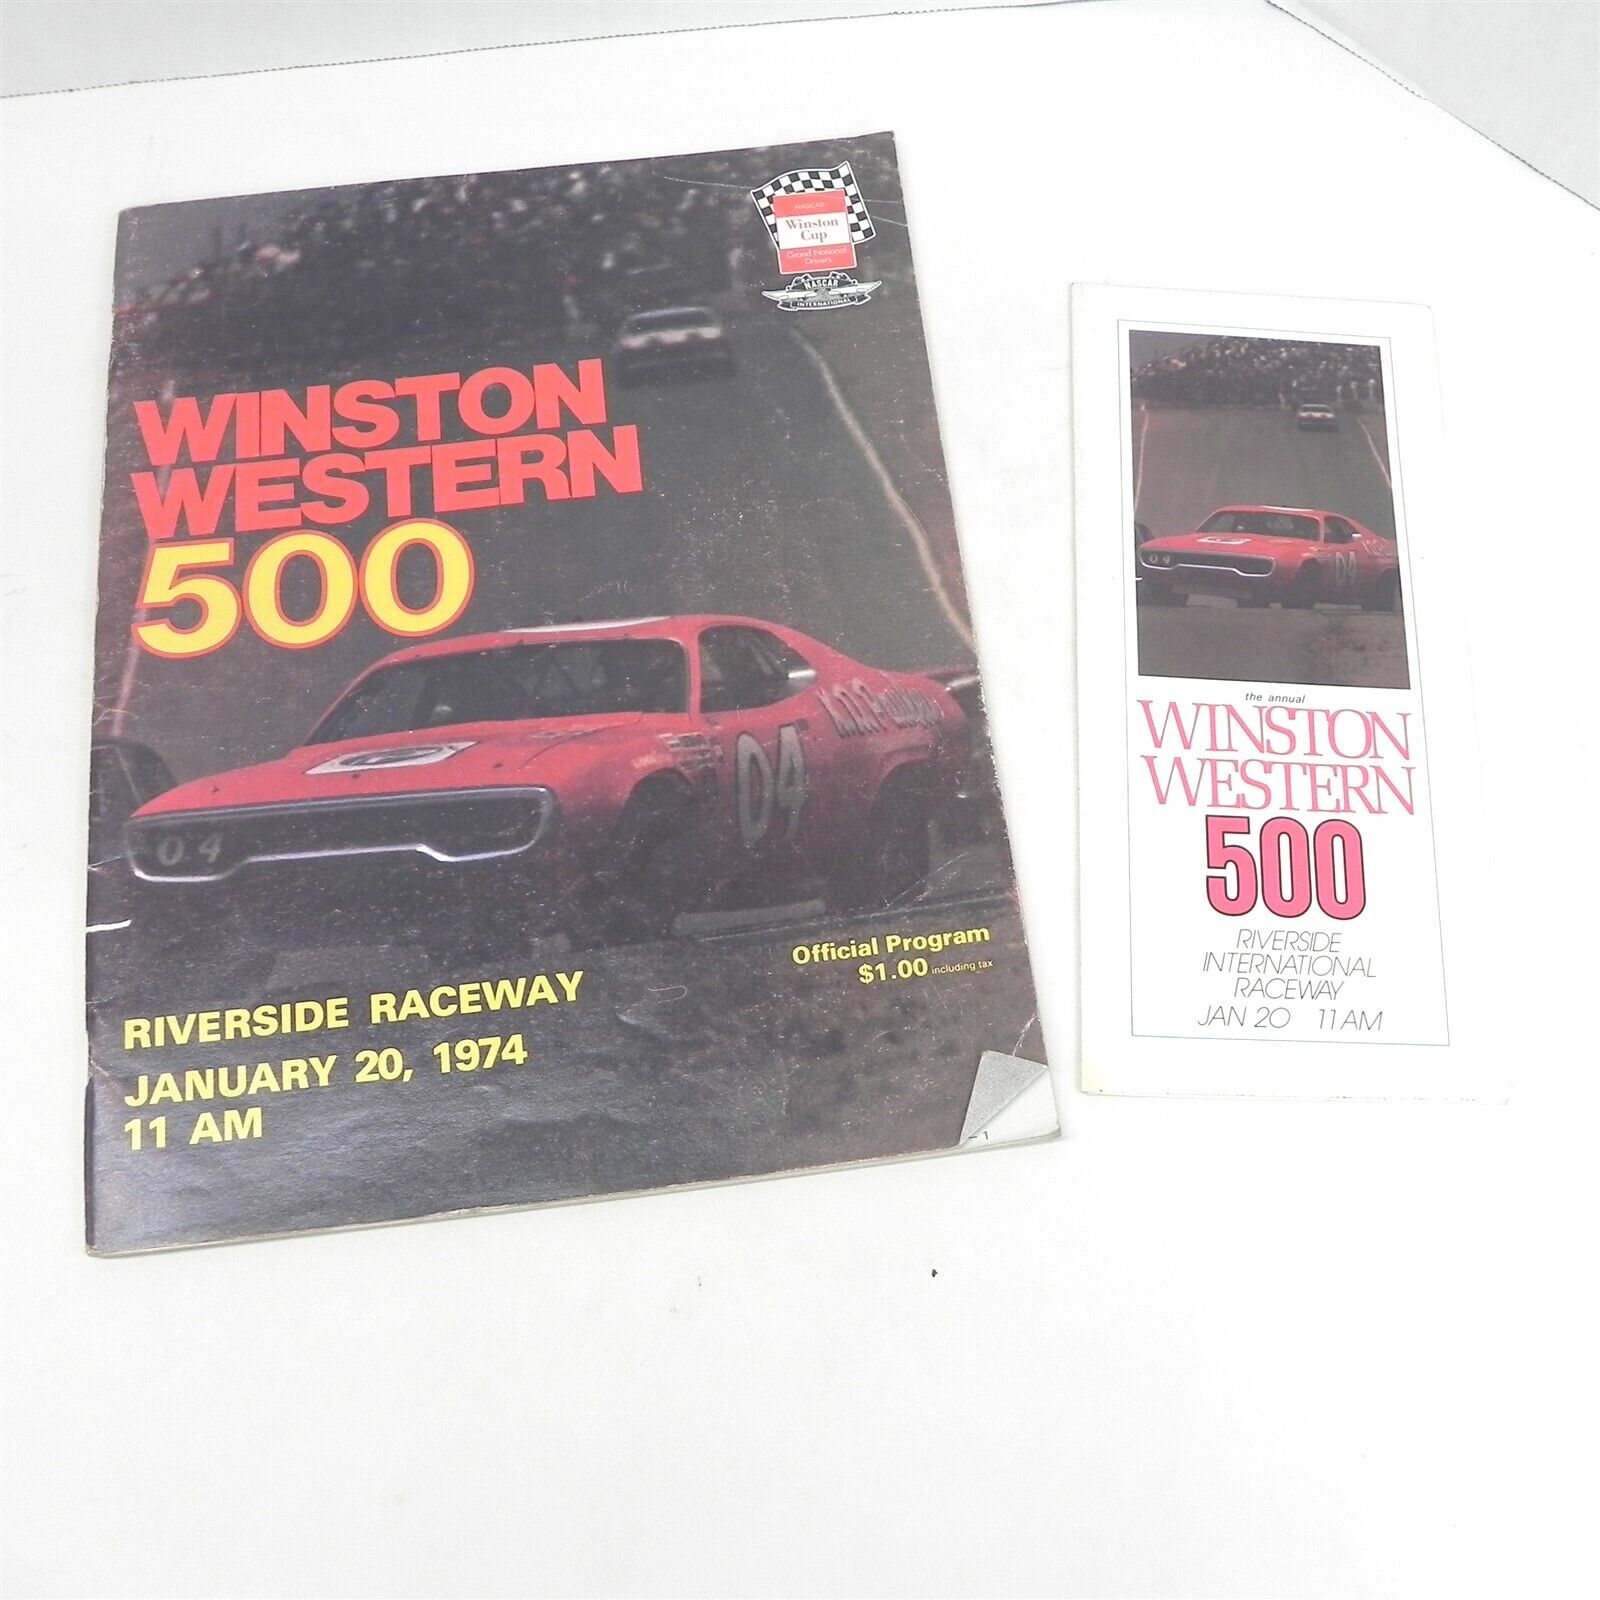 VINTAGE 1974 WINSTON WESTERN 500 OFFICIAL RACE DAY PROGRAM WITH BROCHURE